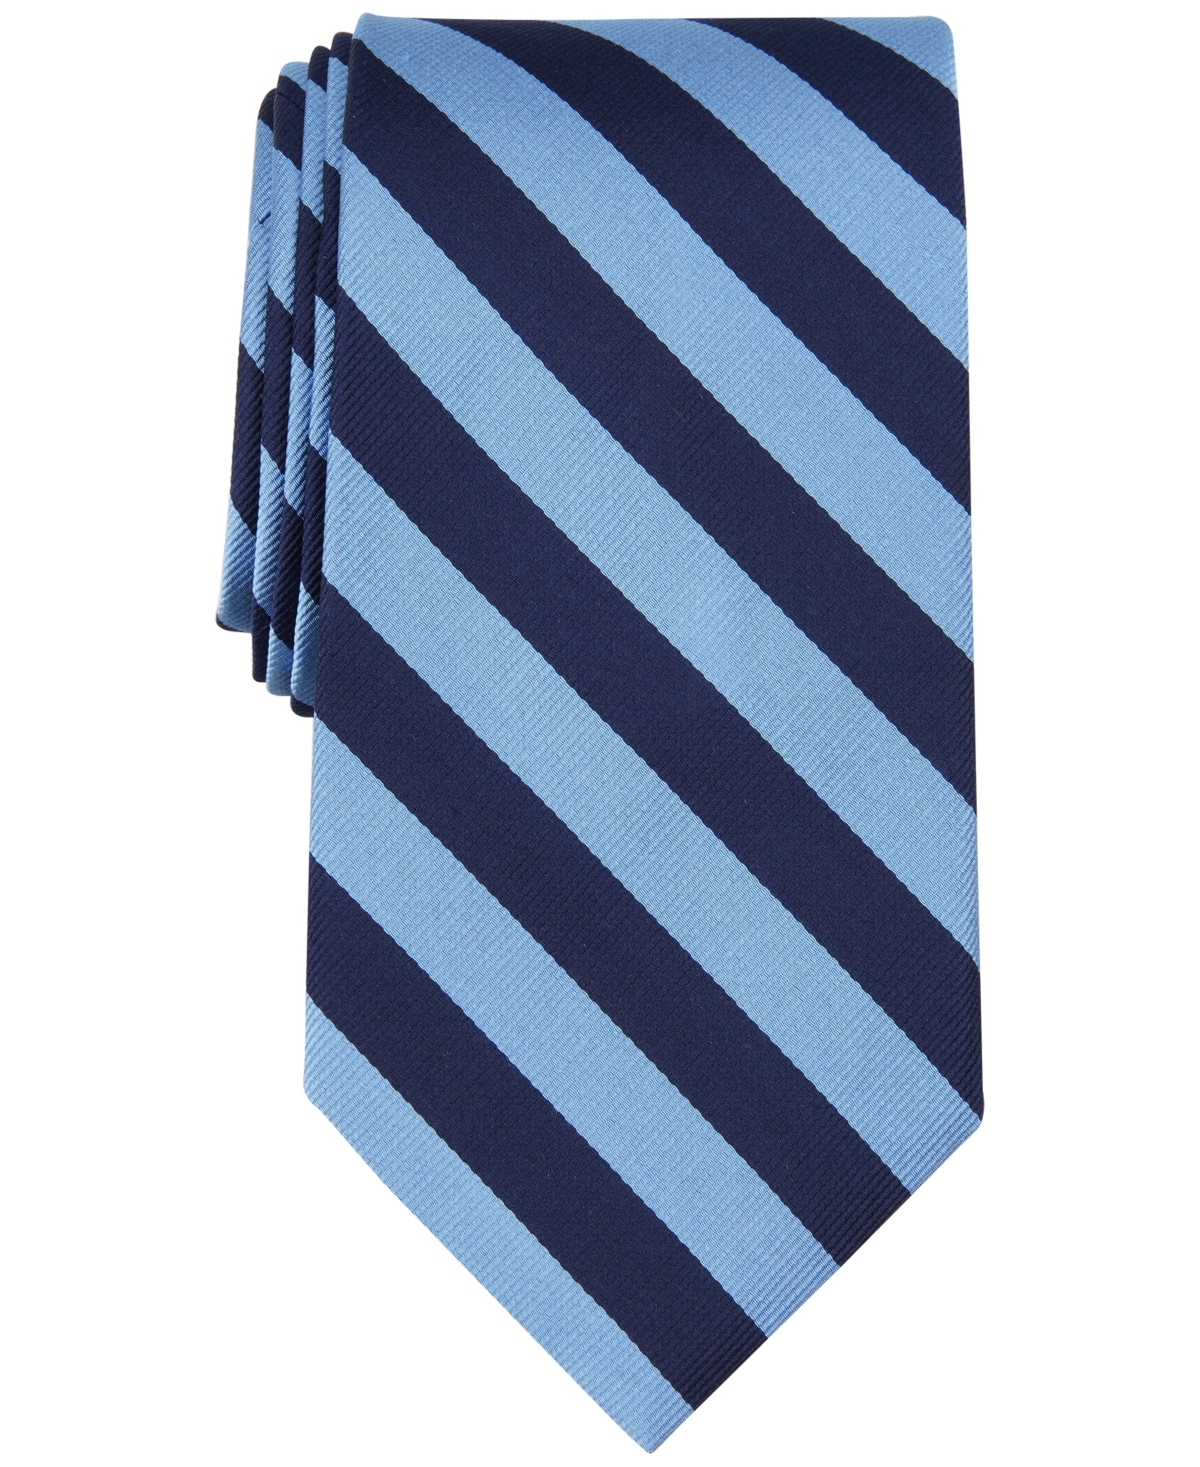 B by Brooks Brothers Men's Classic Double-Stripe Tie - Wine